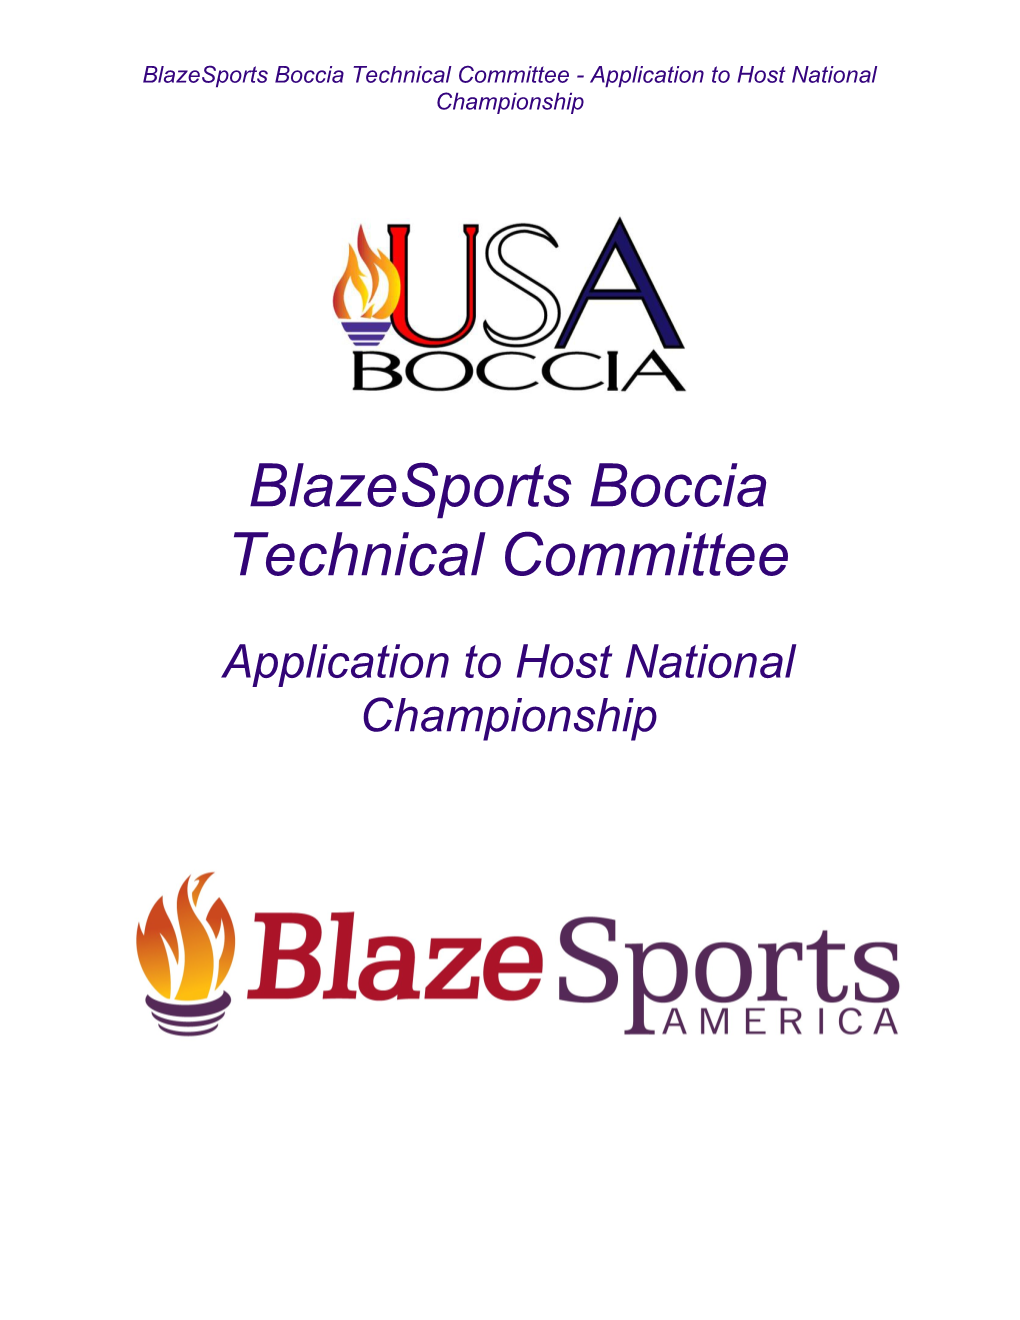 Application to Host National Championship